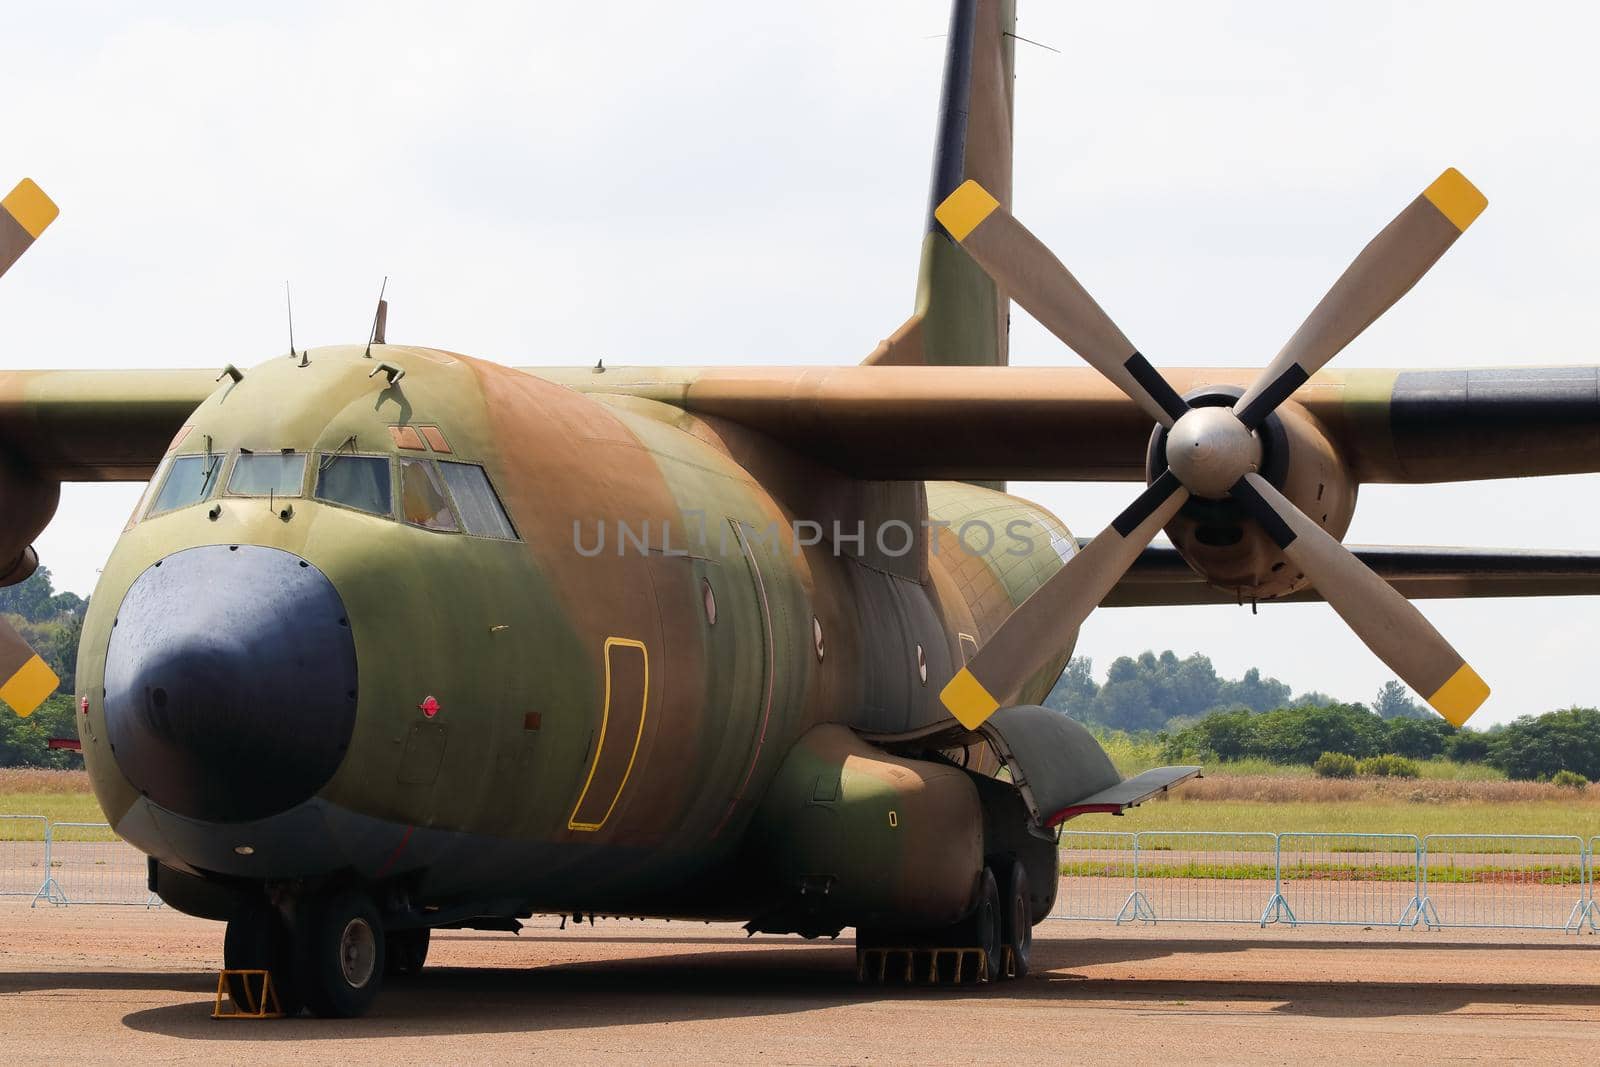 Military Cargo Transport Aircraft Parked At Airport by jjvanginkel